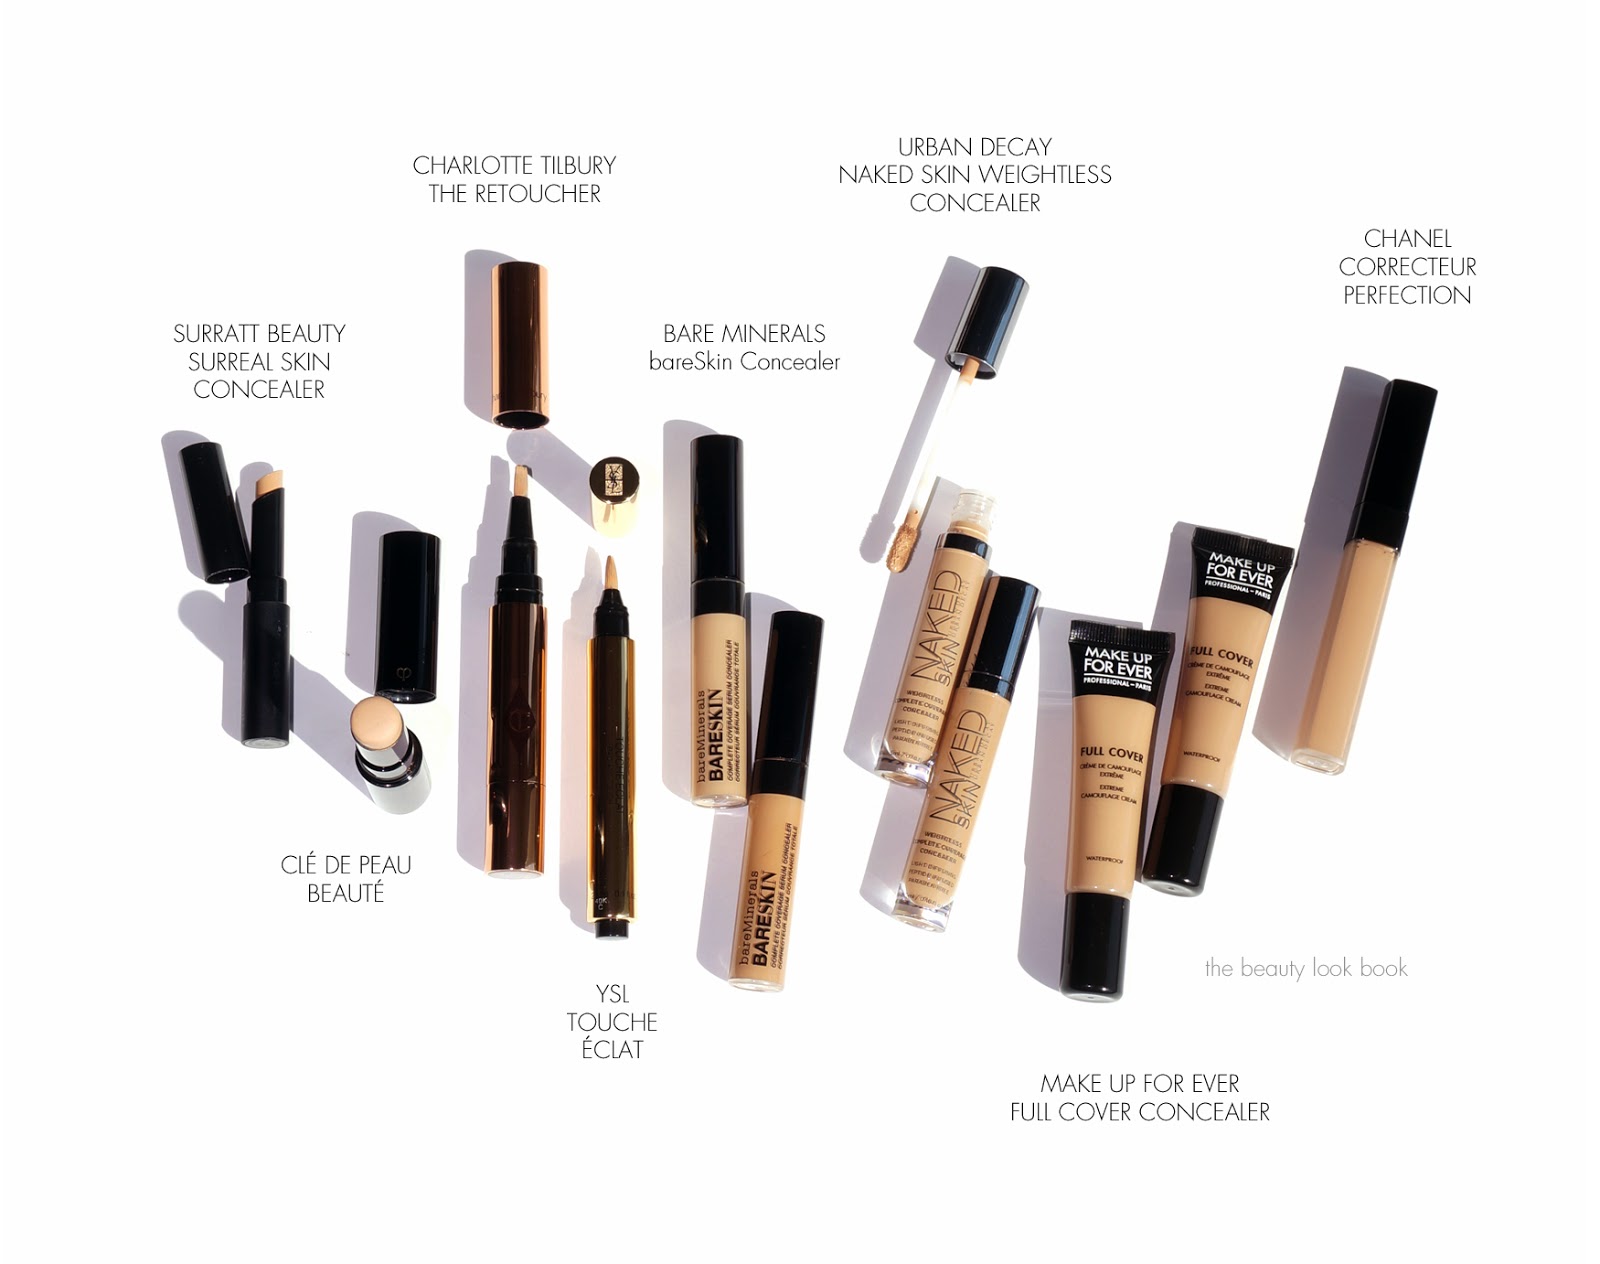 Concealer Archives - Page 2 of 3 - The Beauty Look Book